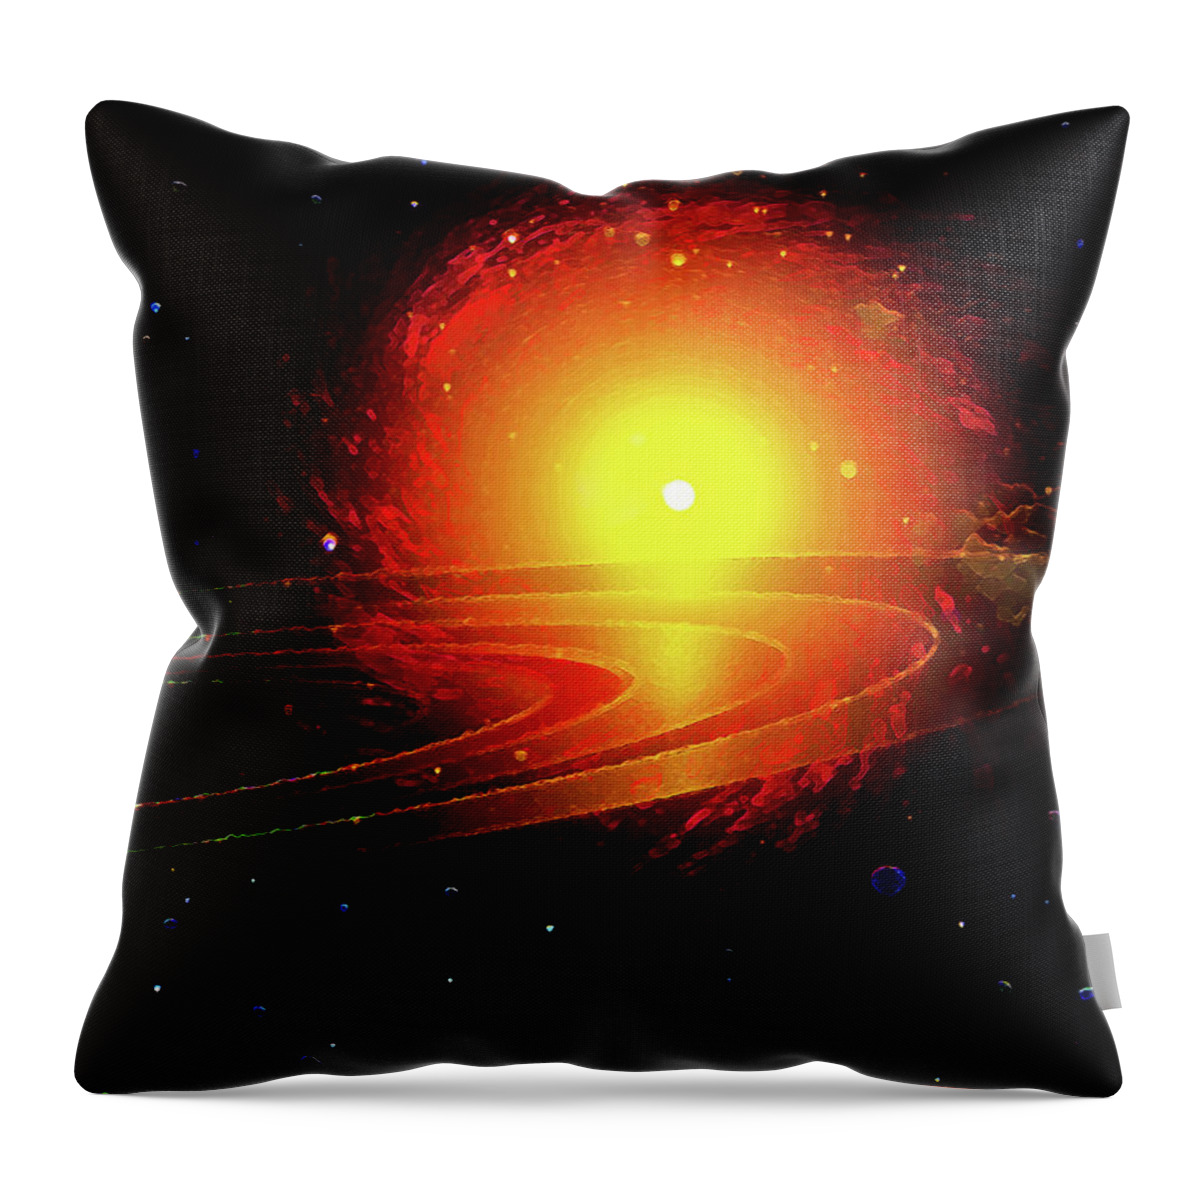  Throw Pillow featuring the digital art Red Dwarf, Yellow Giant Outer Space Background by Don White Artdreamer